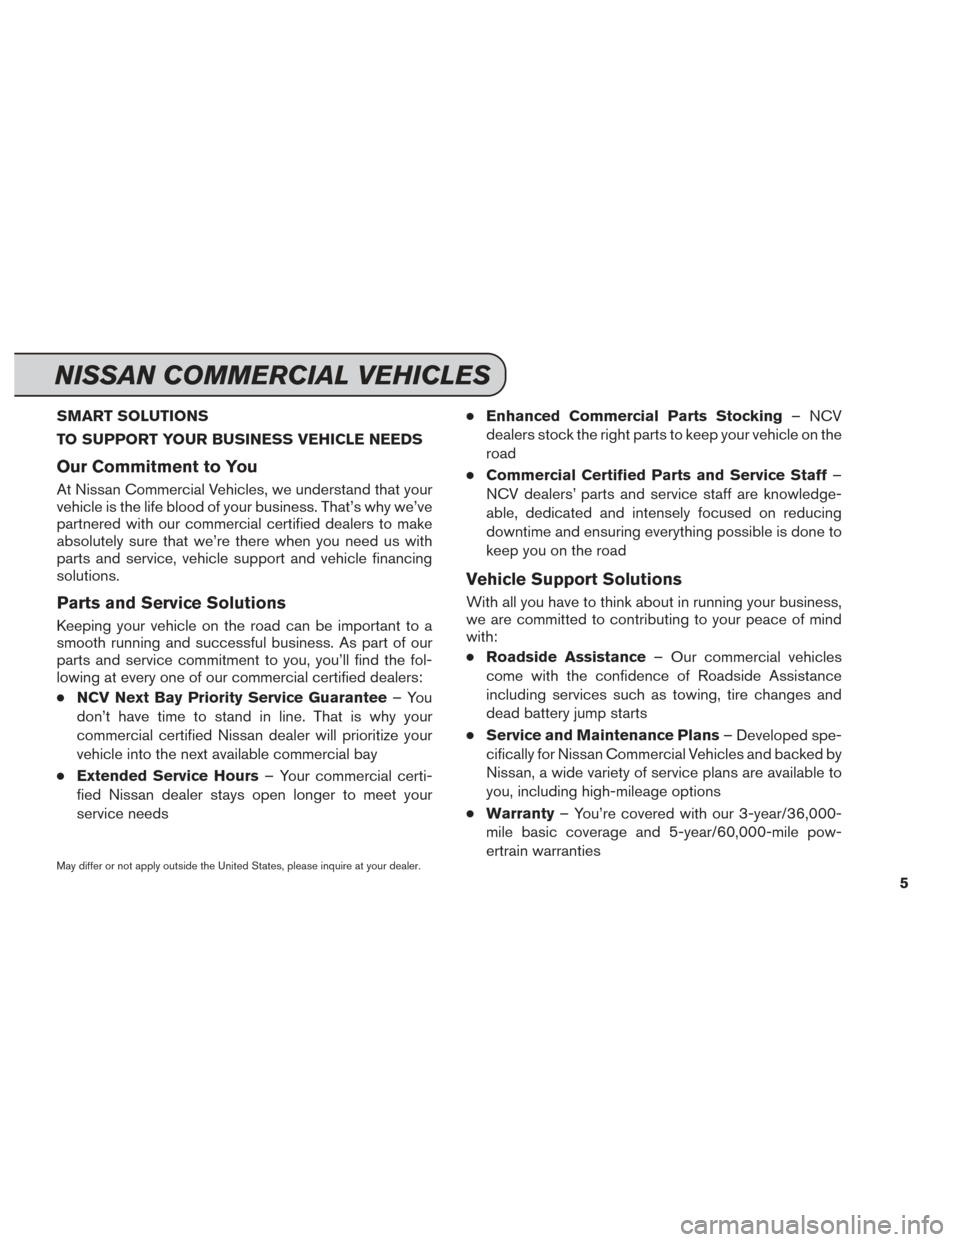 NISSAN QUEST 2014 RE52 / 4.G Service And Maintenance Guide SMART SOLUTIONS
TO SUPPORT YOUR BUSINESS VEHICLE NEEDS
Our Commitment to You
At Nissan Commercial Vehicles, we understand that your
vehicle is the life blood of your business. That’s why we’ve
par